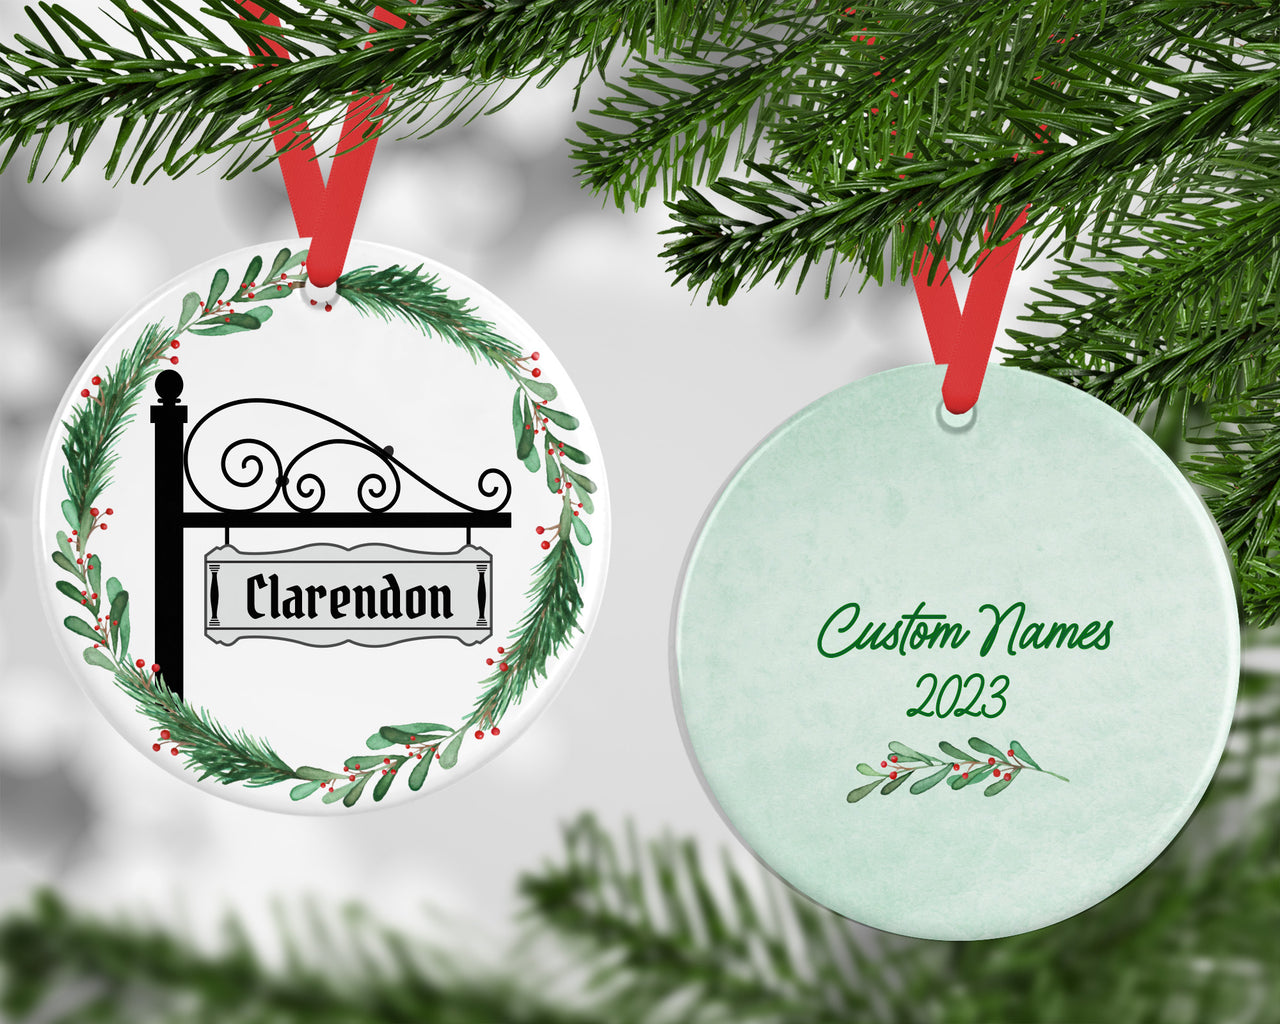 Personalized Ornament - Street Sign and Names